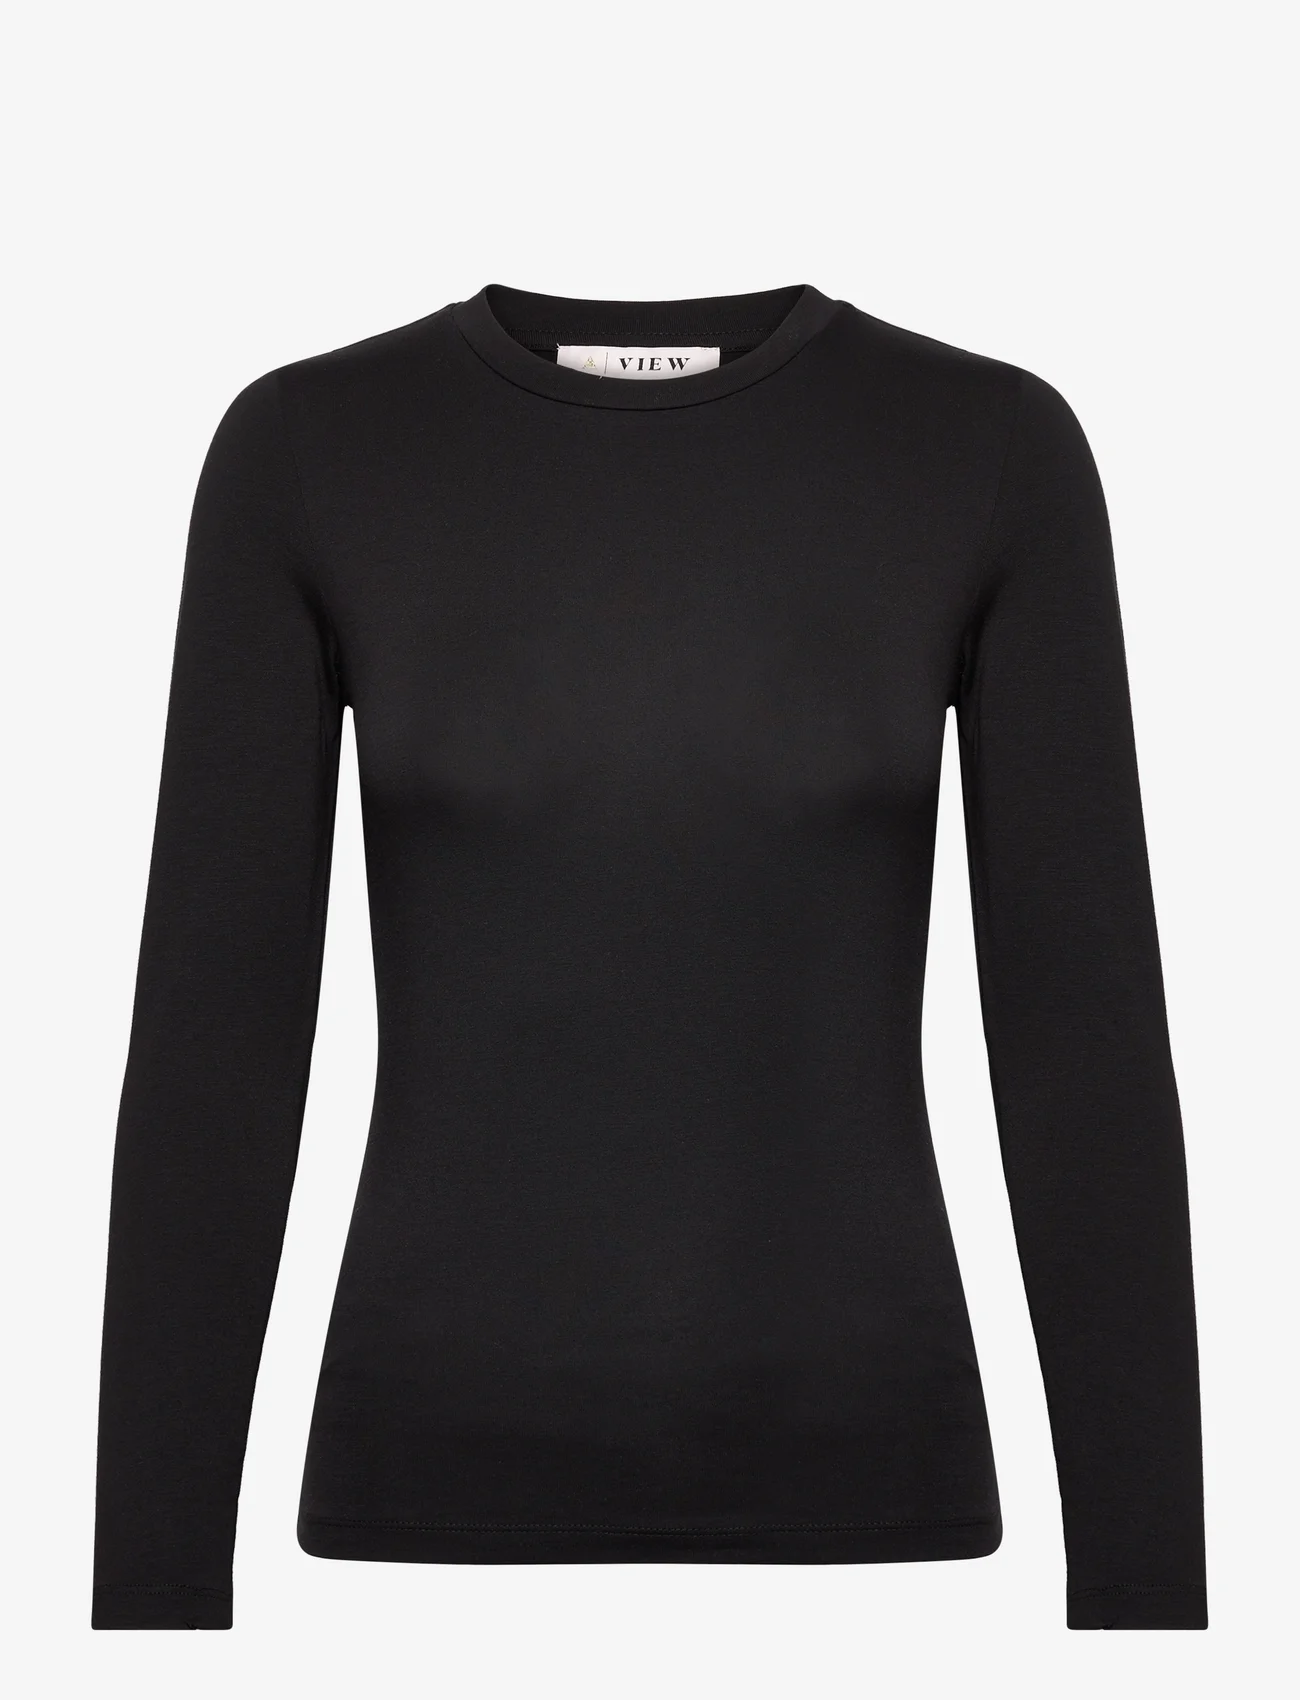 A-View - Stabil top l/s - long-sleeved tops - black - 0